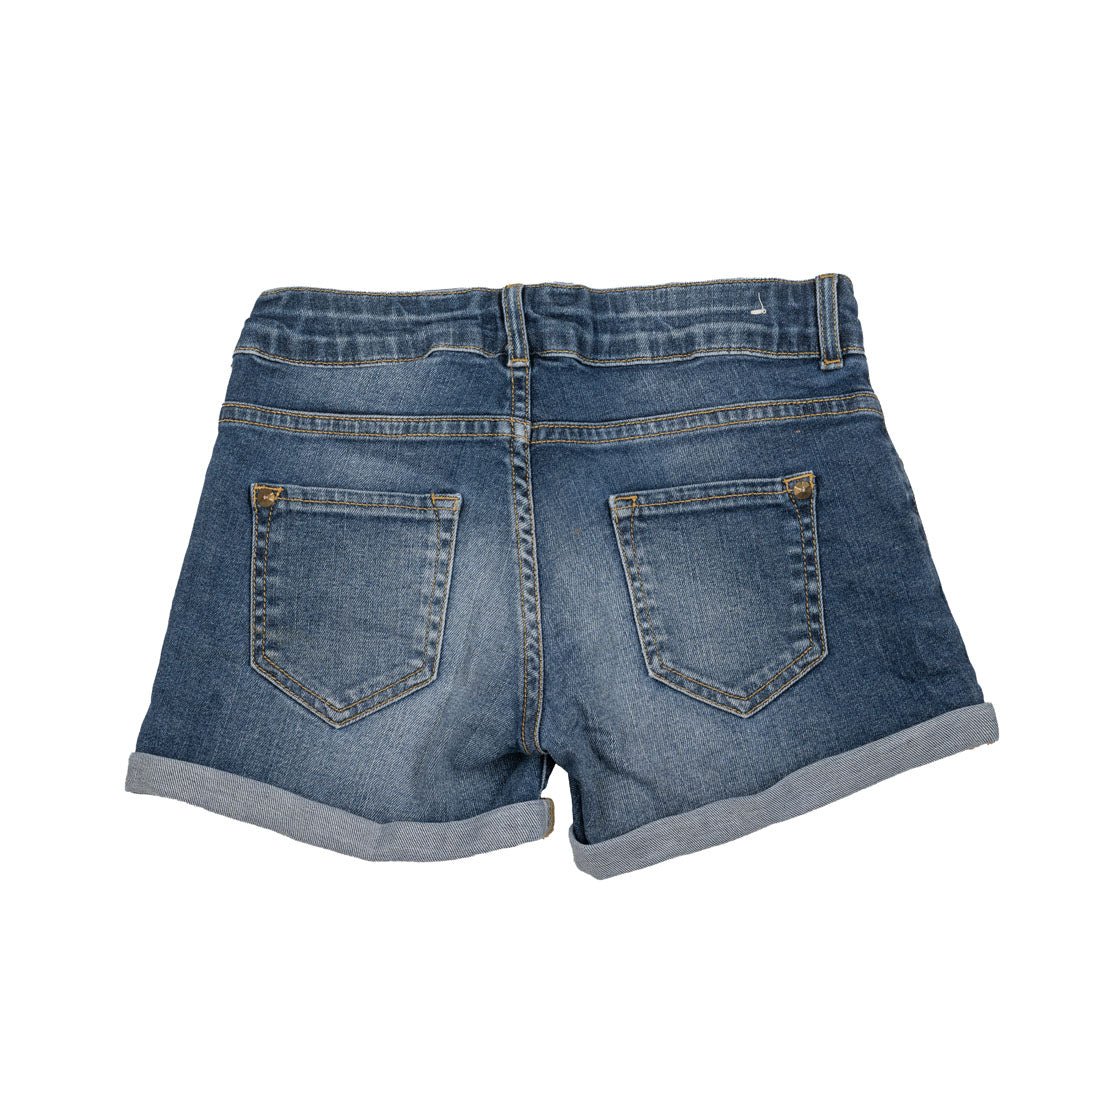 Zara Jeans Shorts For Girls - mymadstore.com